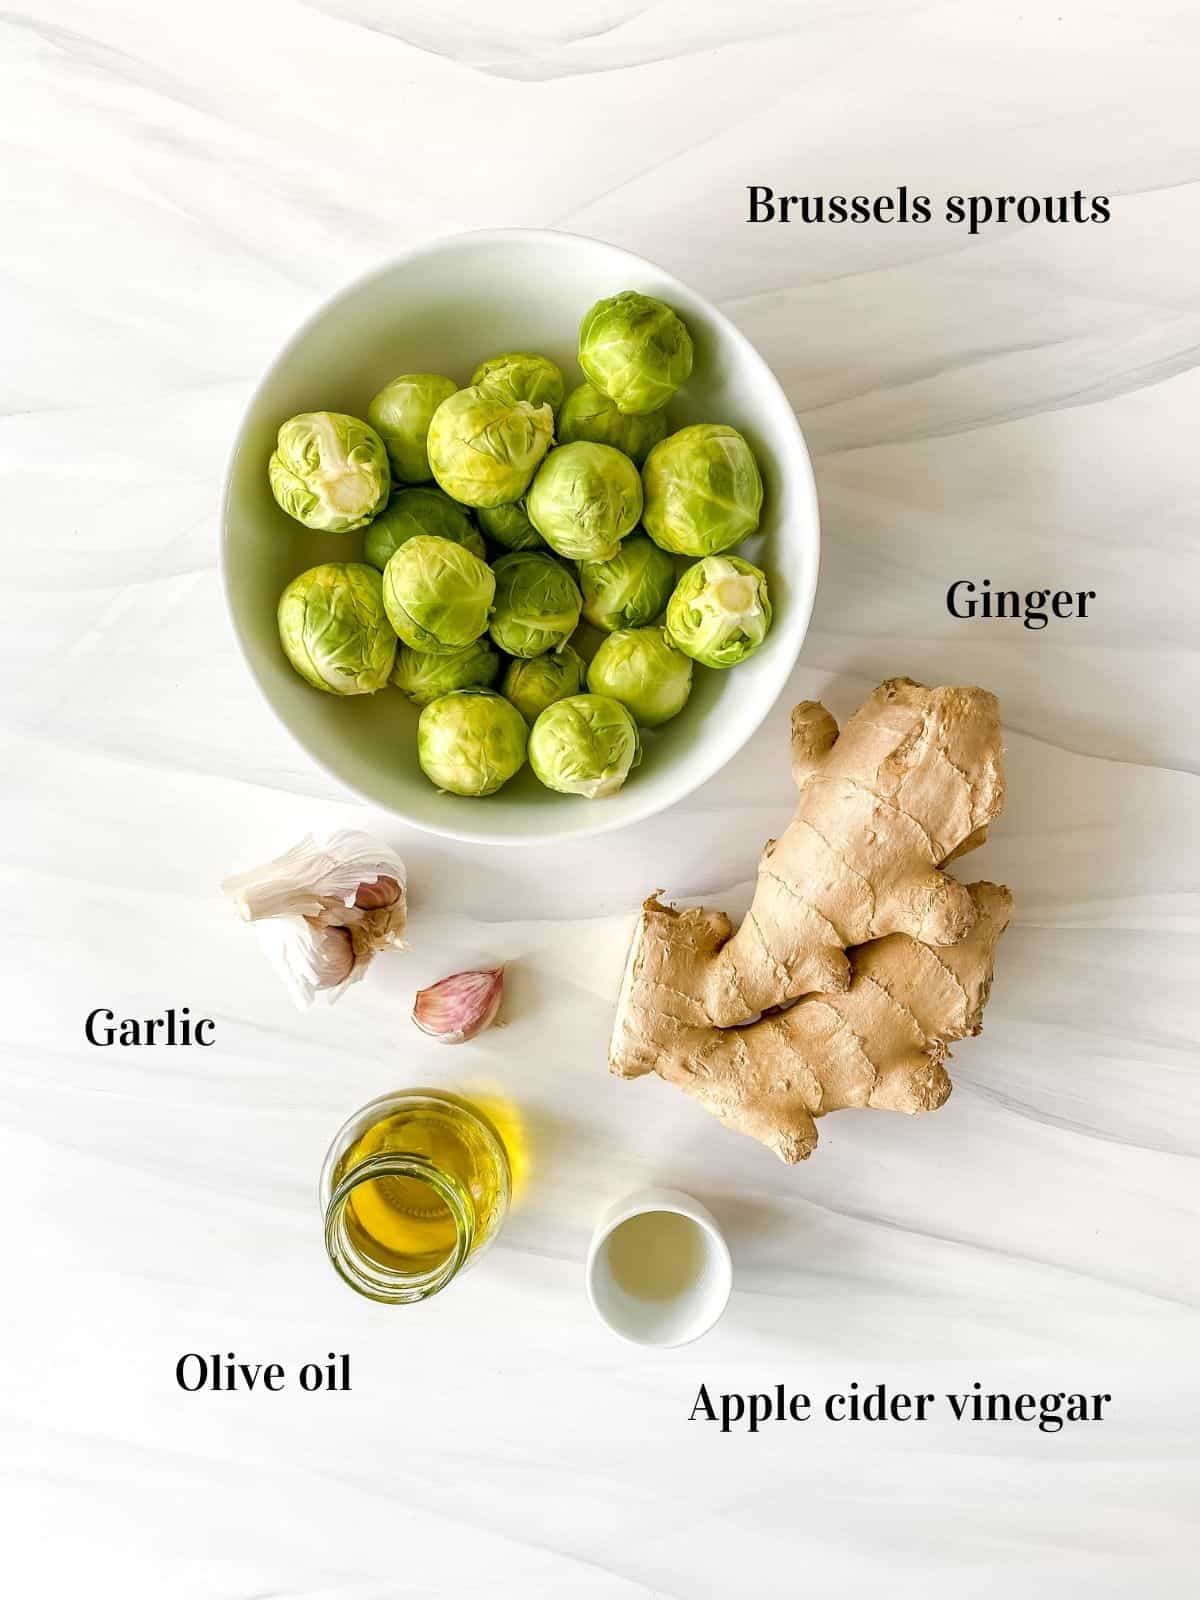 all the ingredients to make ginger brussels sprouts individually labelled.